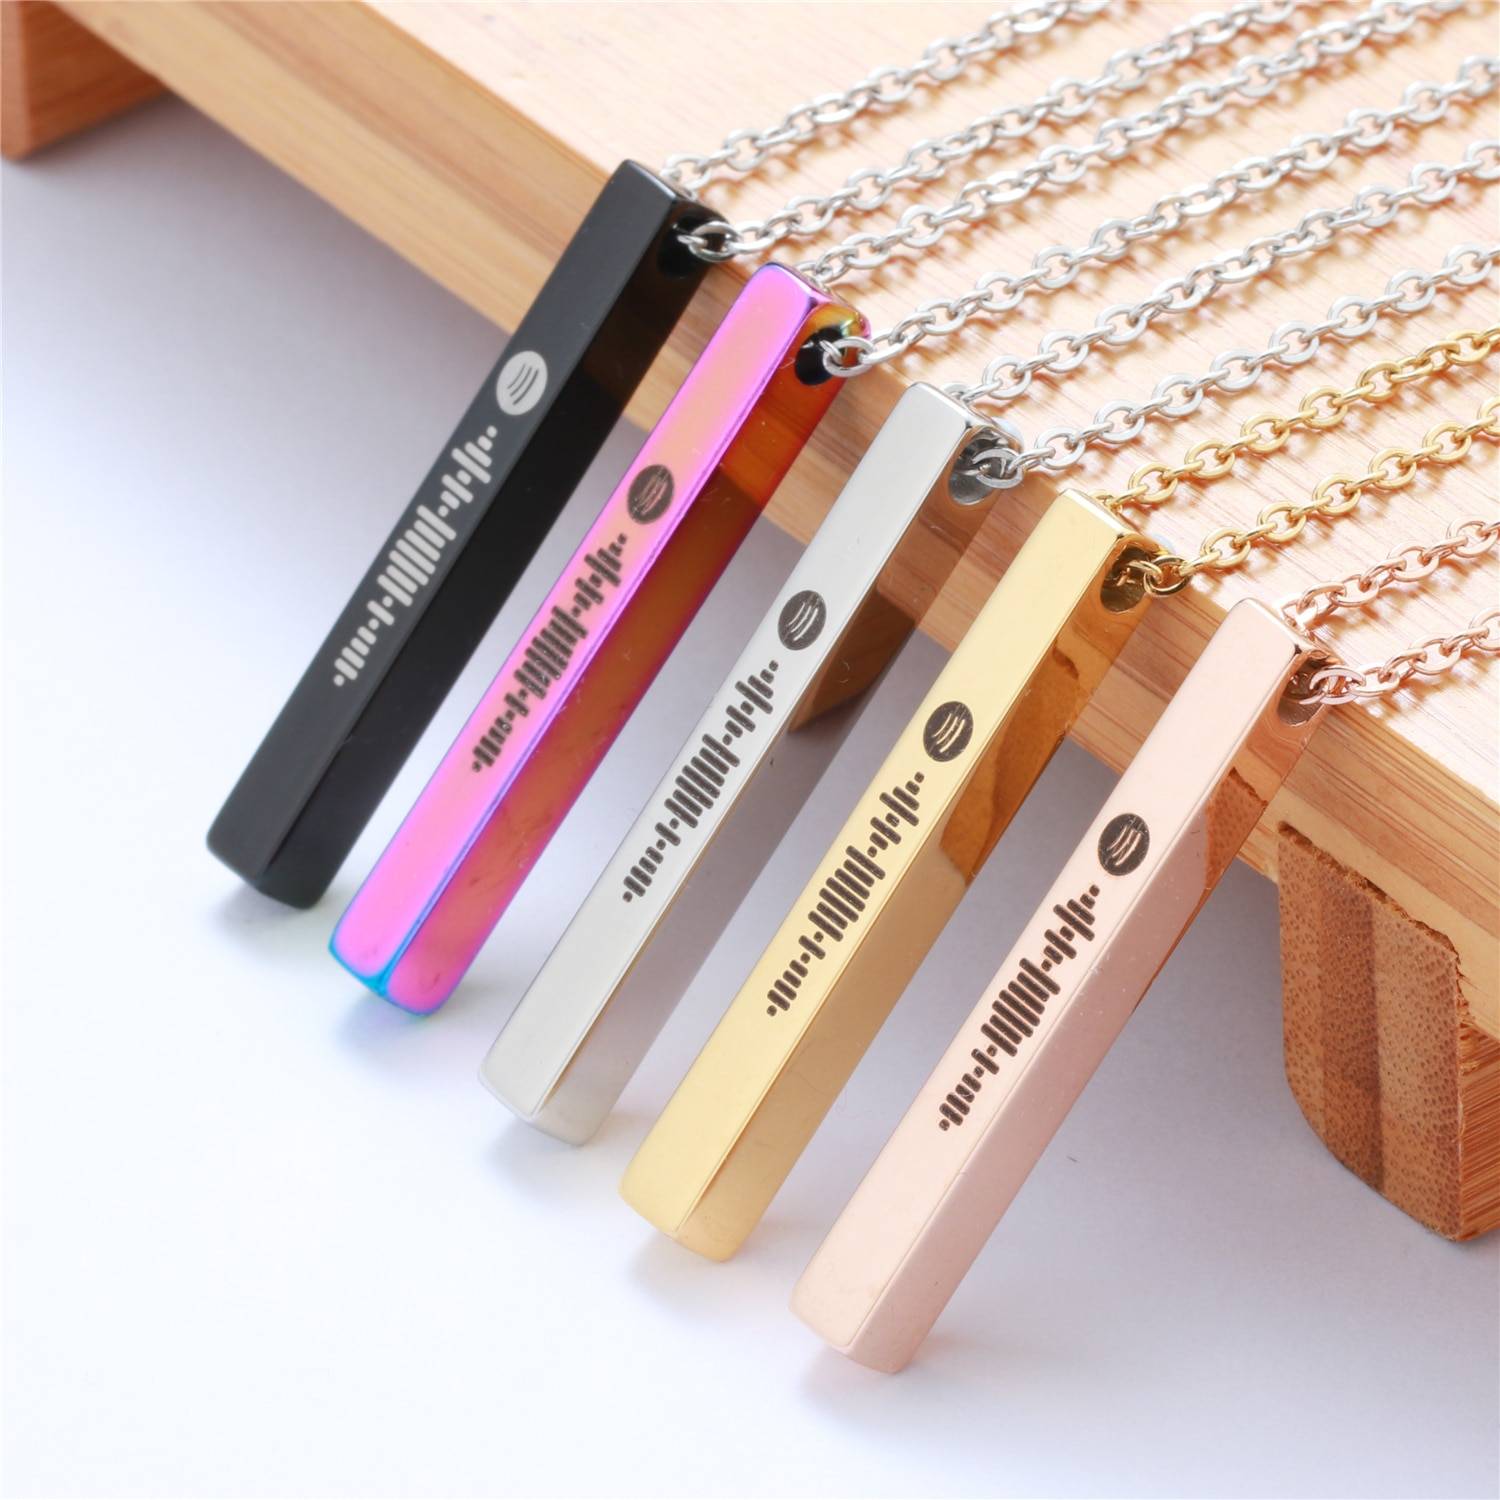 Custom Music Spotify Code Pendant Necklace for Women Personalized Stainless Steel Laser Engrave Bar Necklace for Family Gifts Uncategorized 8d255f28538fbae46aeae7: Black|Gold|Rainbow|Rose Gold|Silver